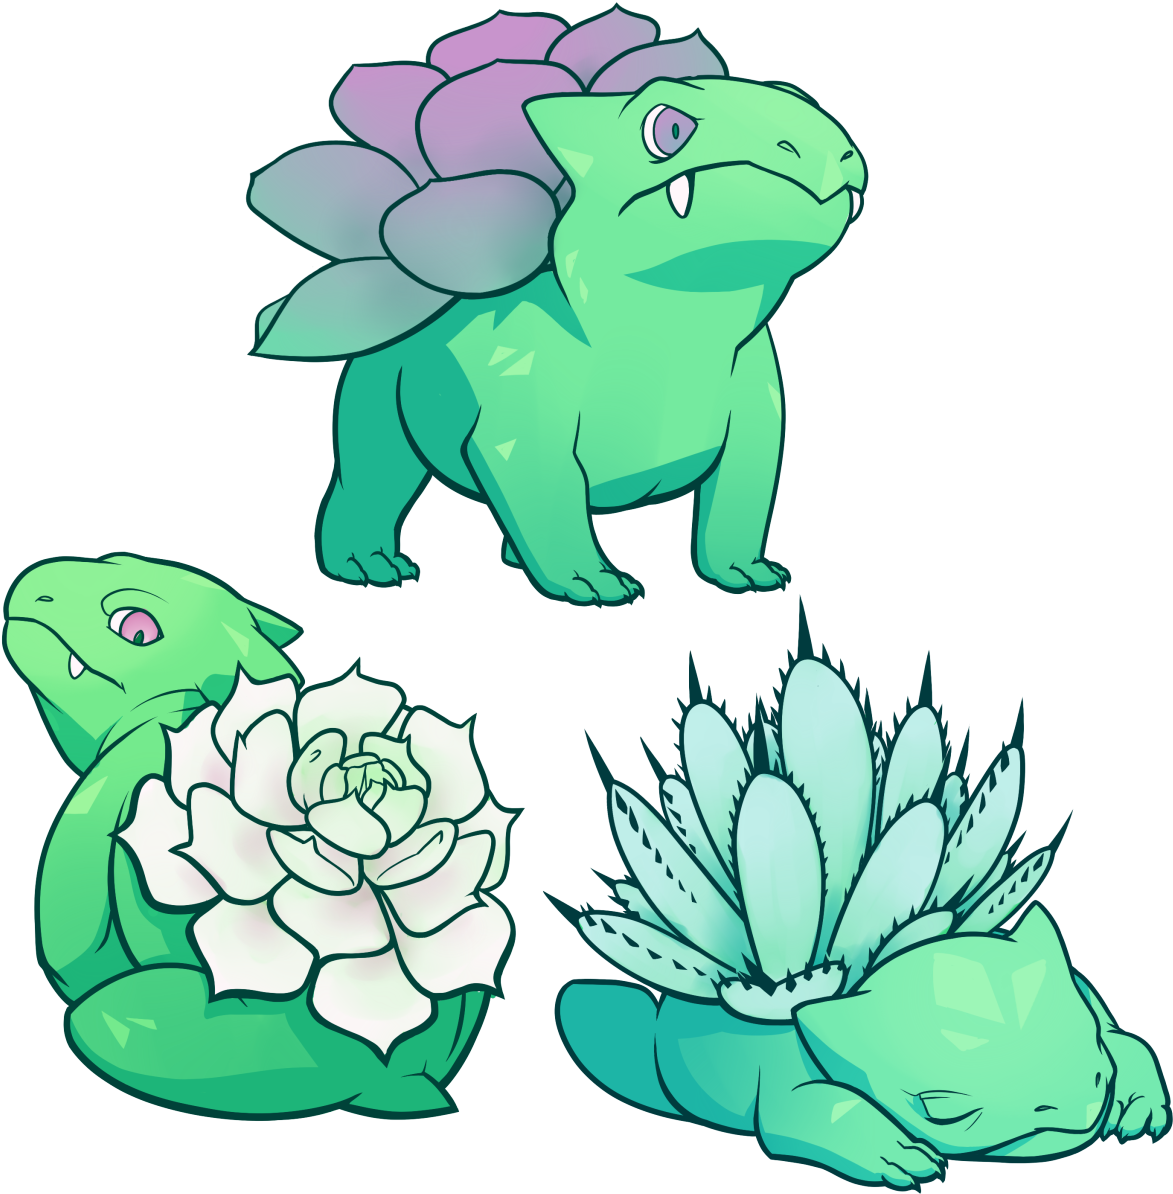 Succulent Ivysaurs Do I Draw Succulents Too Often Maybe - Succulent Ivysaurs Do I Draw Succulents Too Often Maybe (1280x1280)